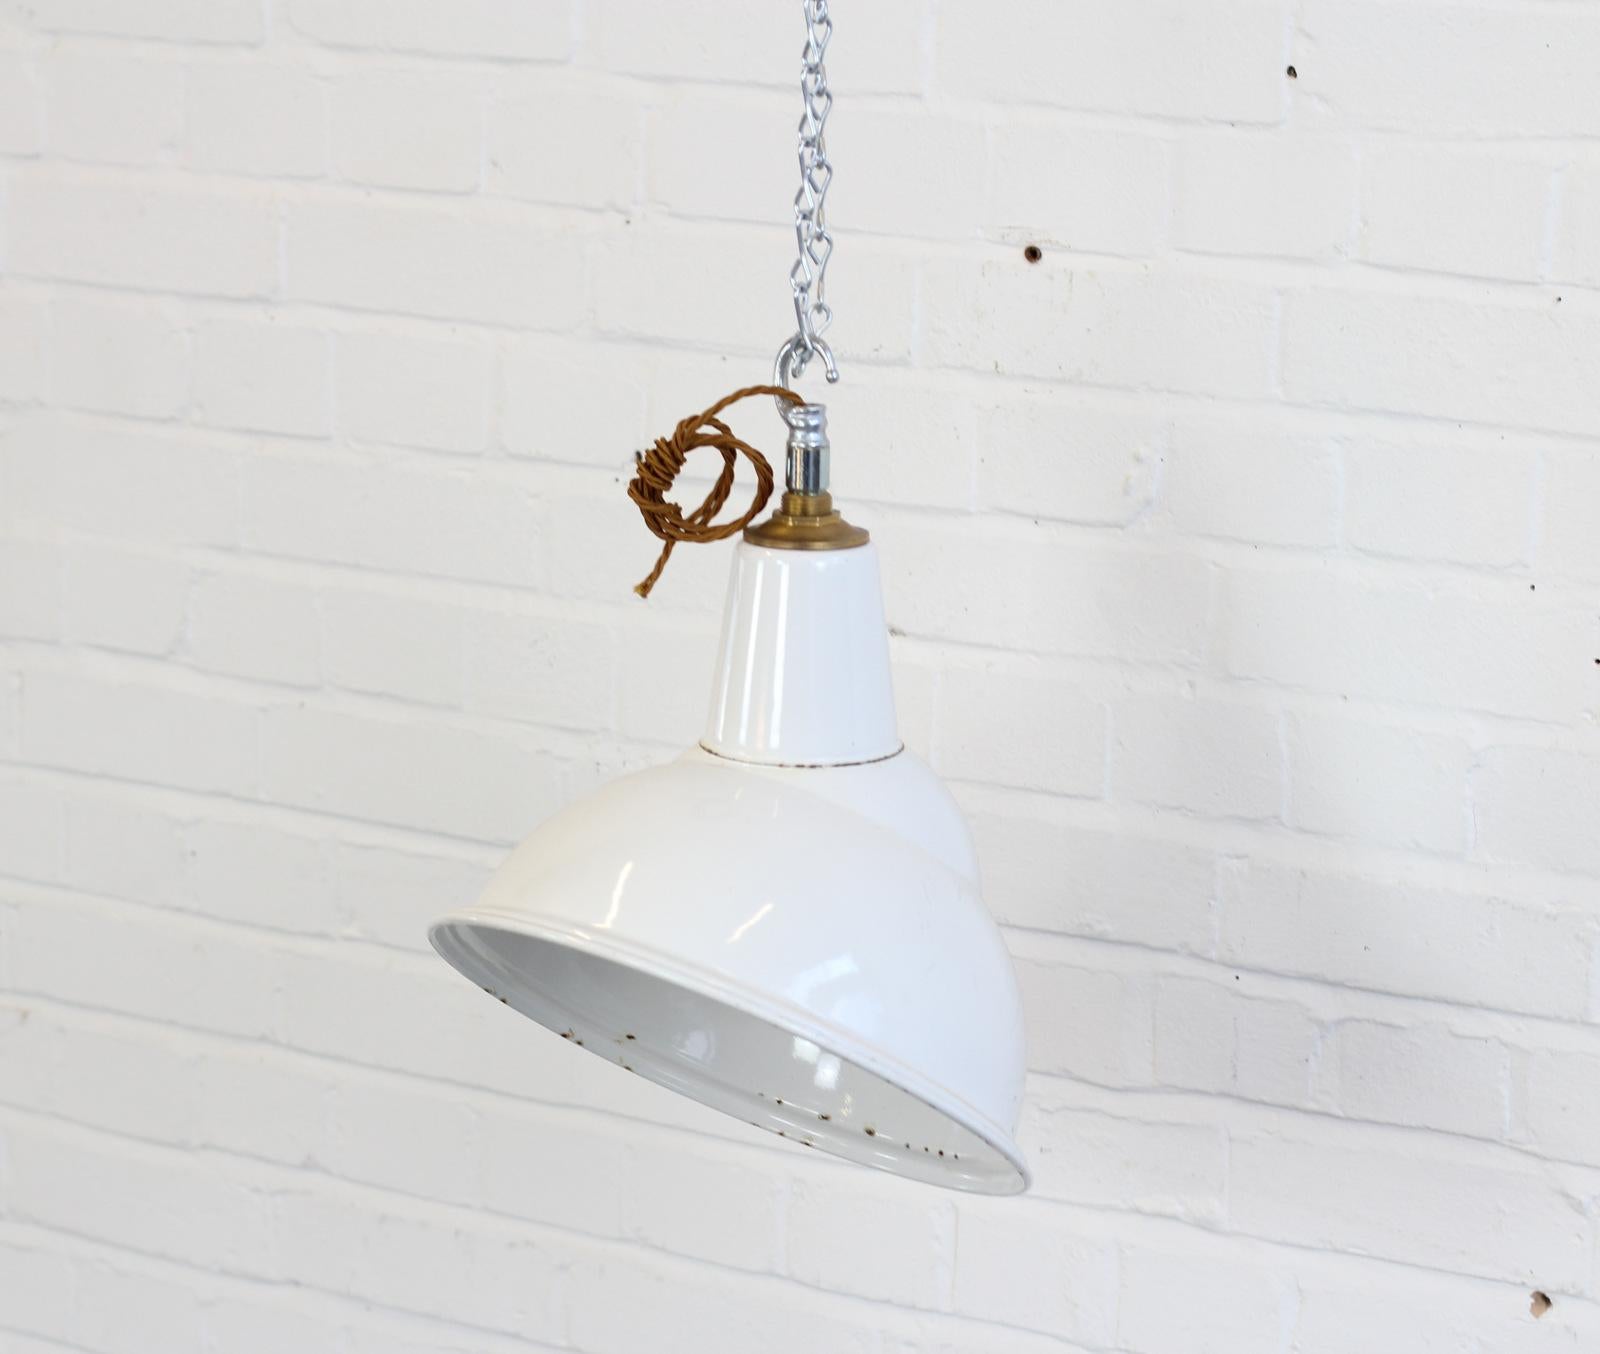 White Parabolic factory lights by Benjamin, circa 1950s

- Price is per light (13 available)
- Vitreous white enamel 
- Some shades still retain their original foil badges
- Comes with 100cm of gold twist cable
- Comes with 100cm of suspension